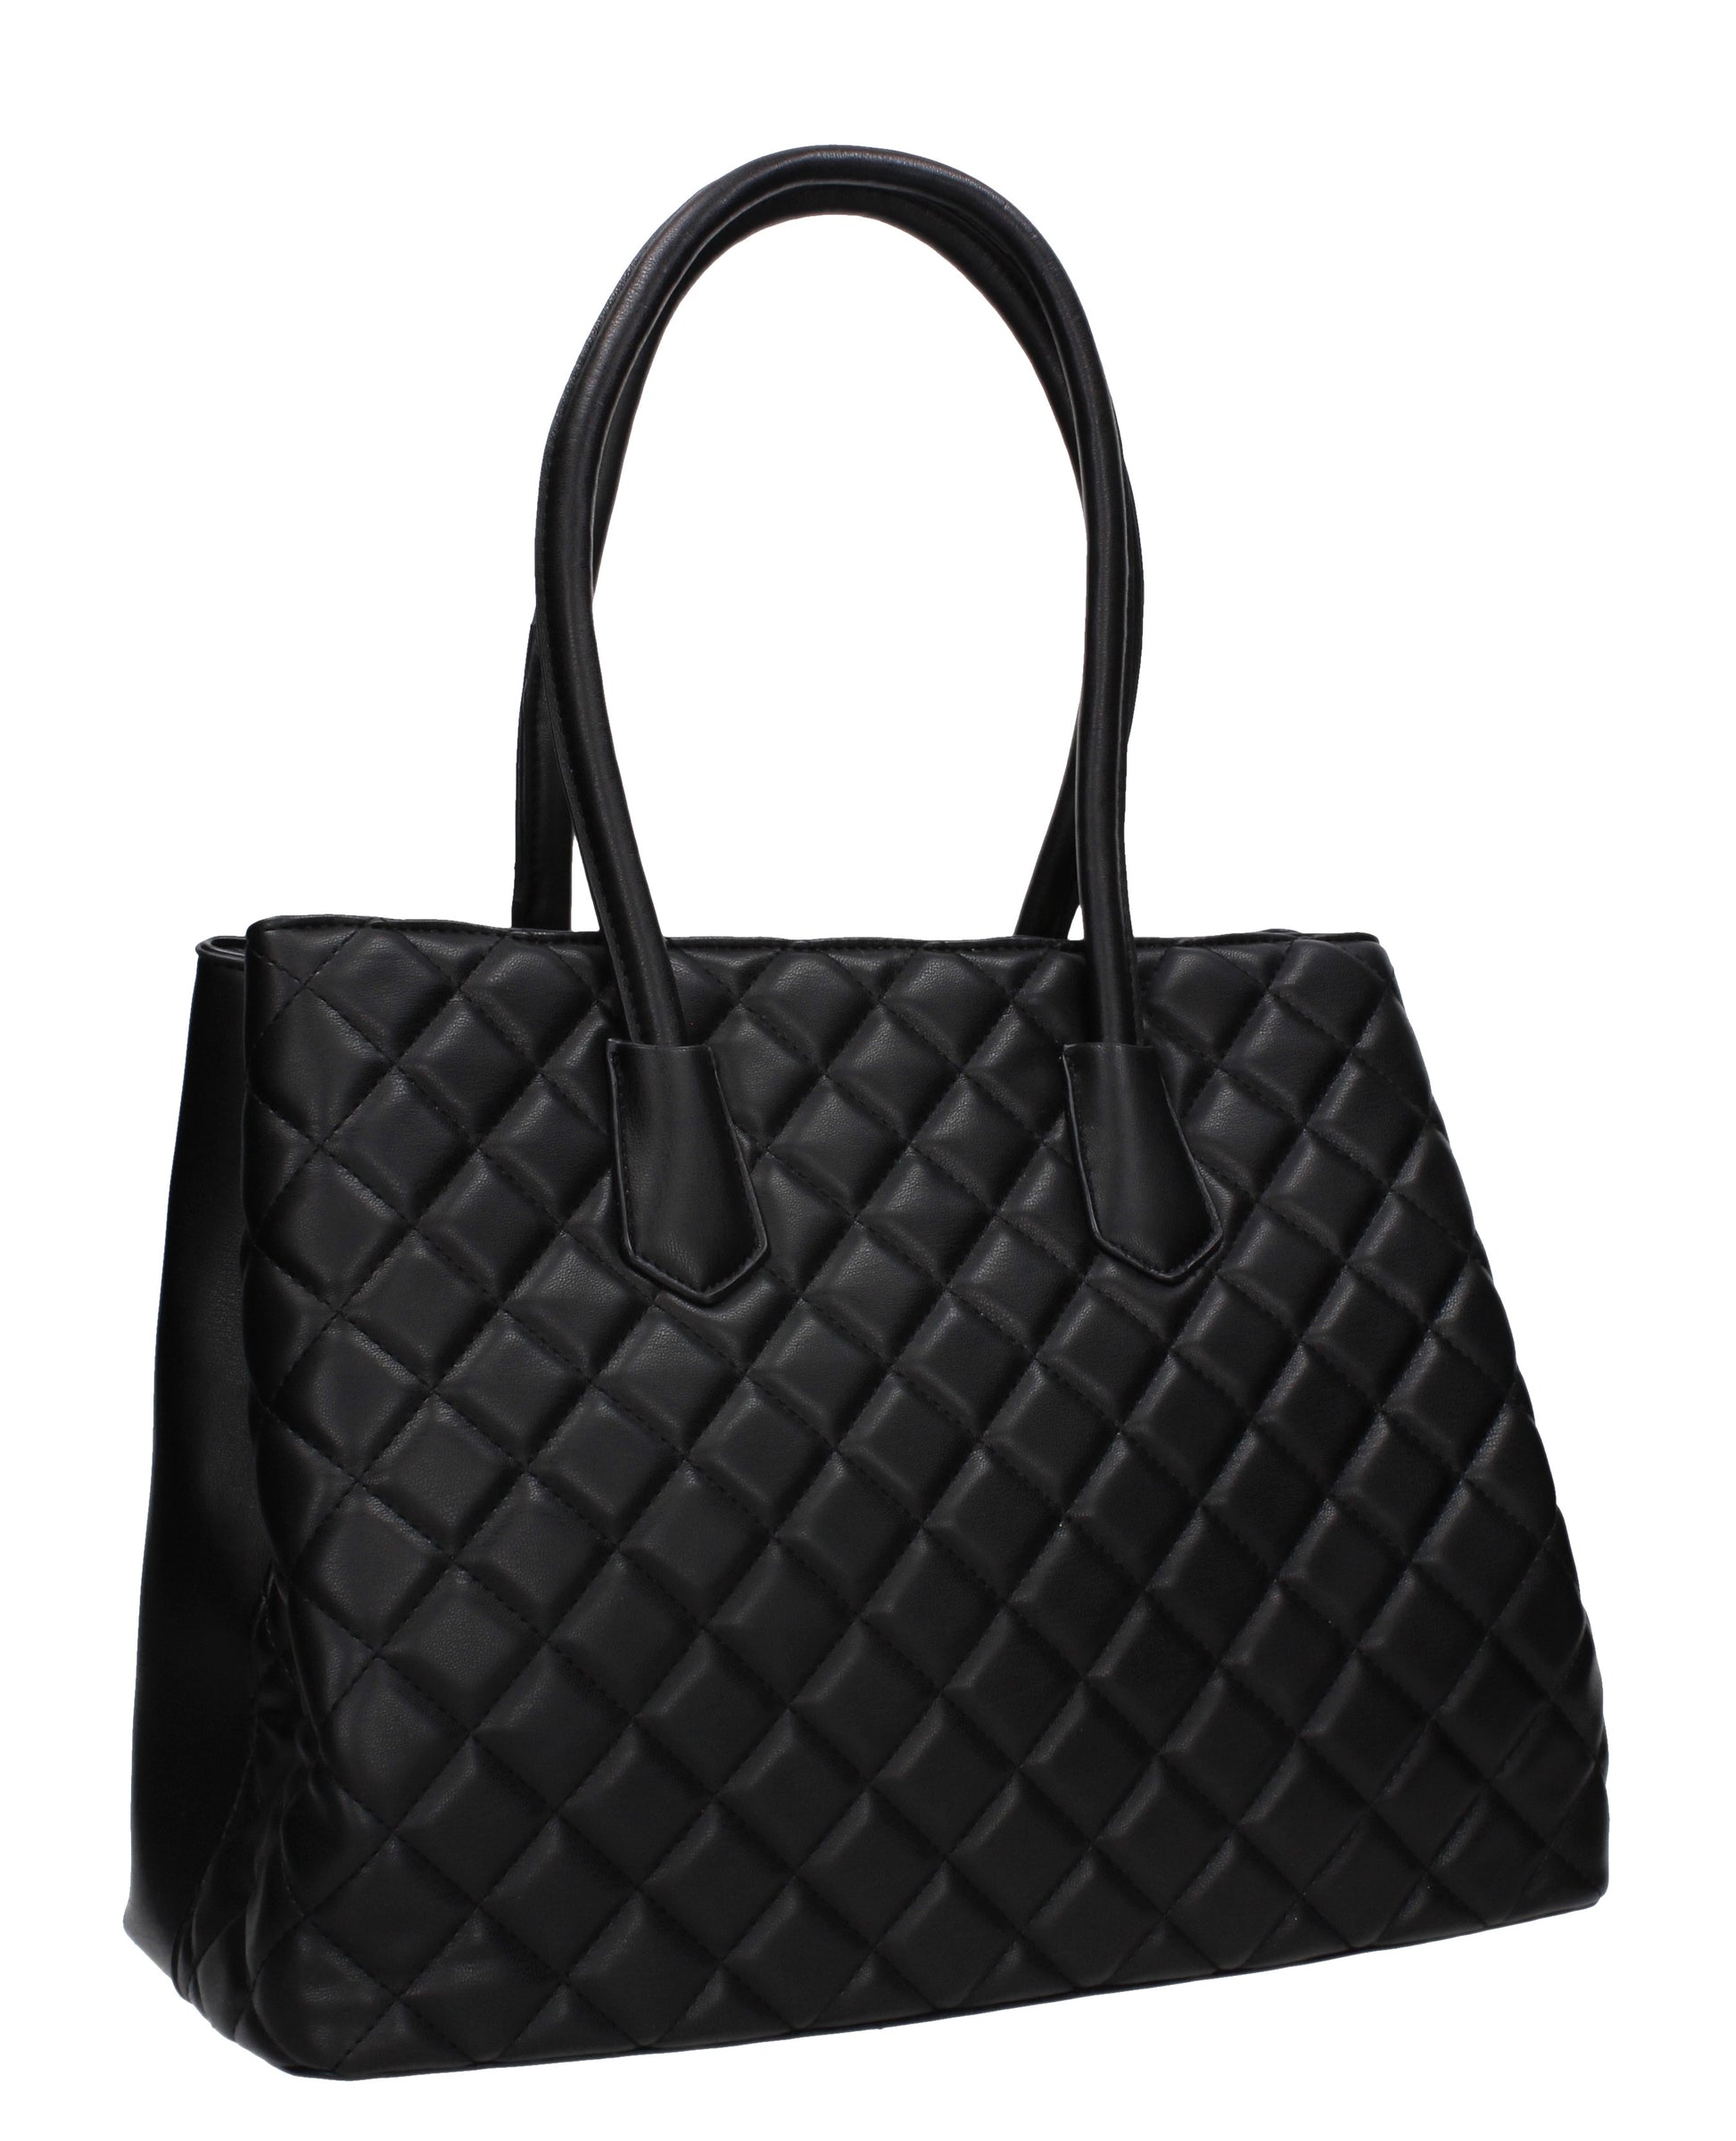 Buy your Valeria Handbag Black Today! Buy with confidence from Swankyswans